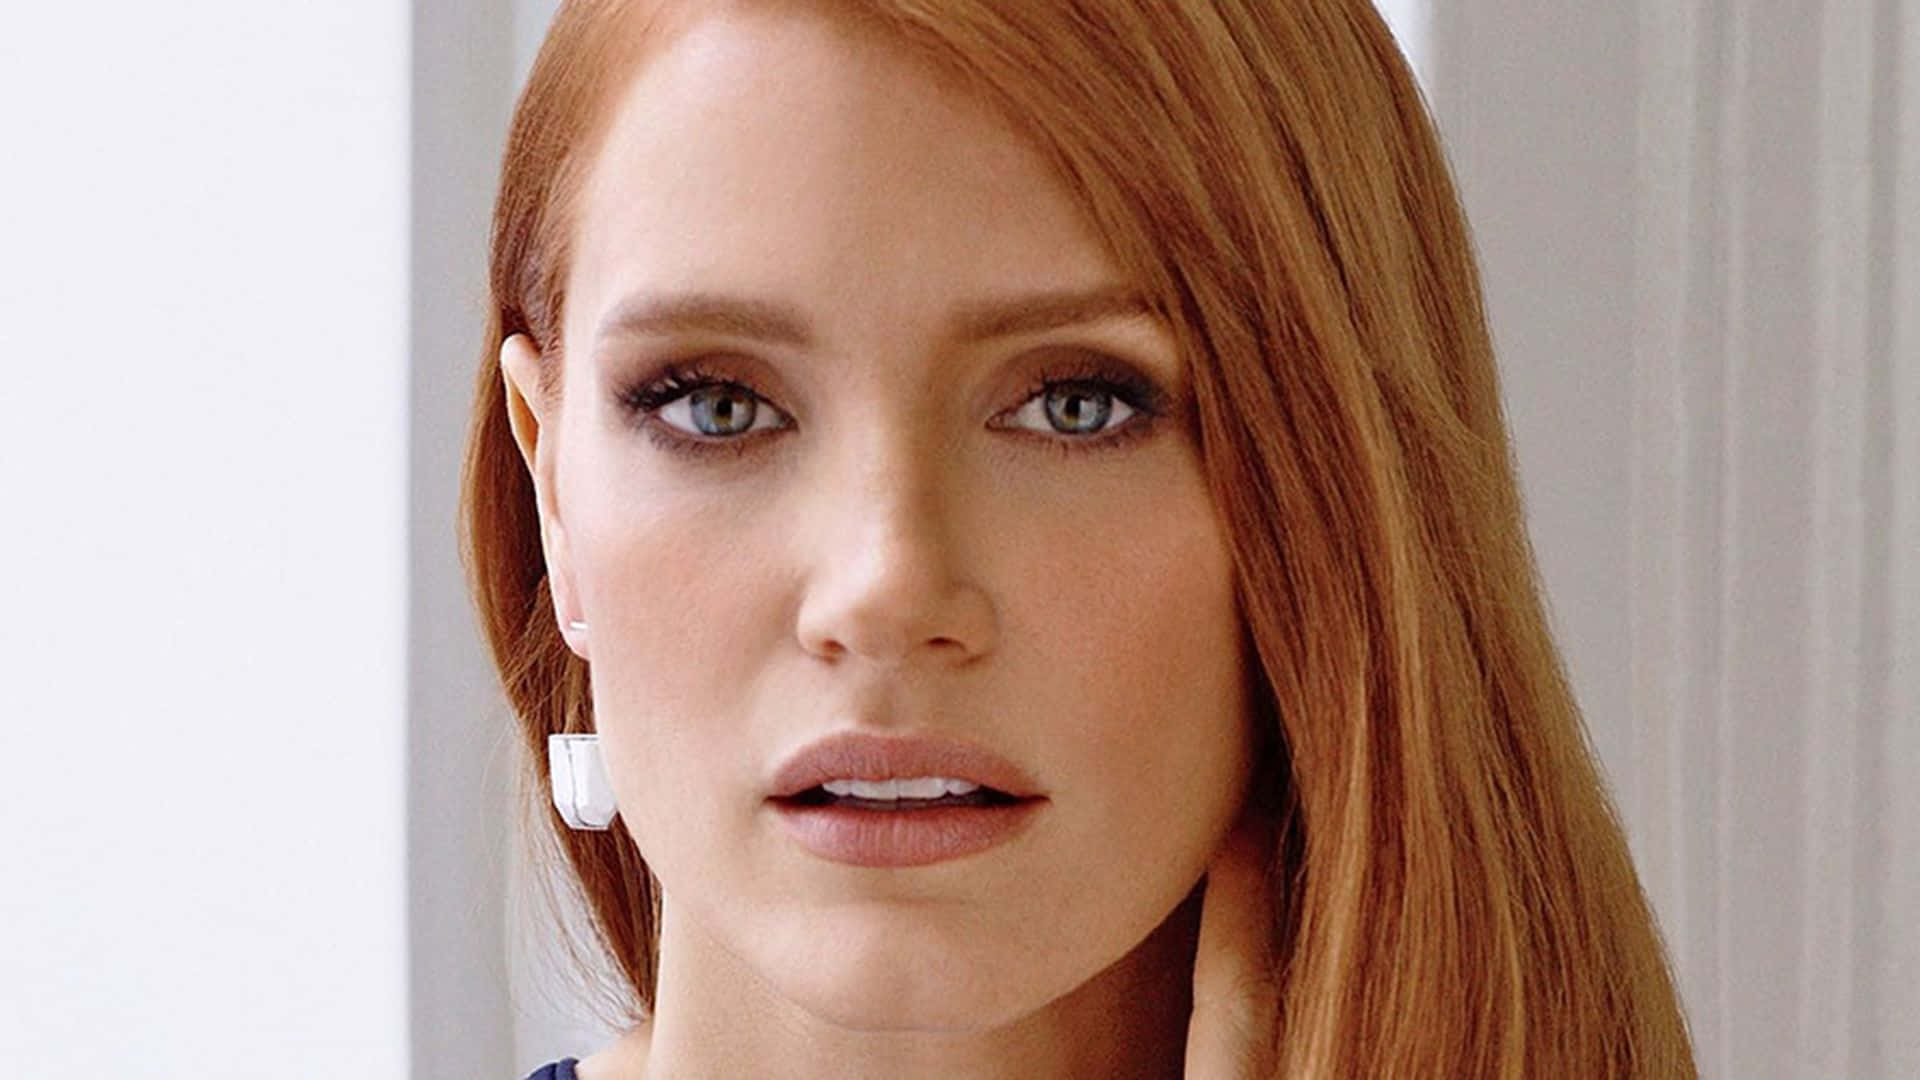 Jessica Chastain posing elegantly in a close-up portrait Wallpaper